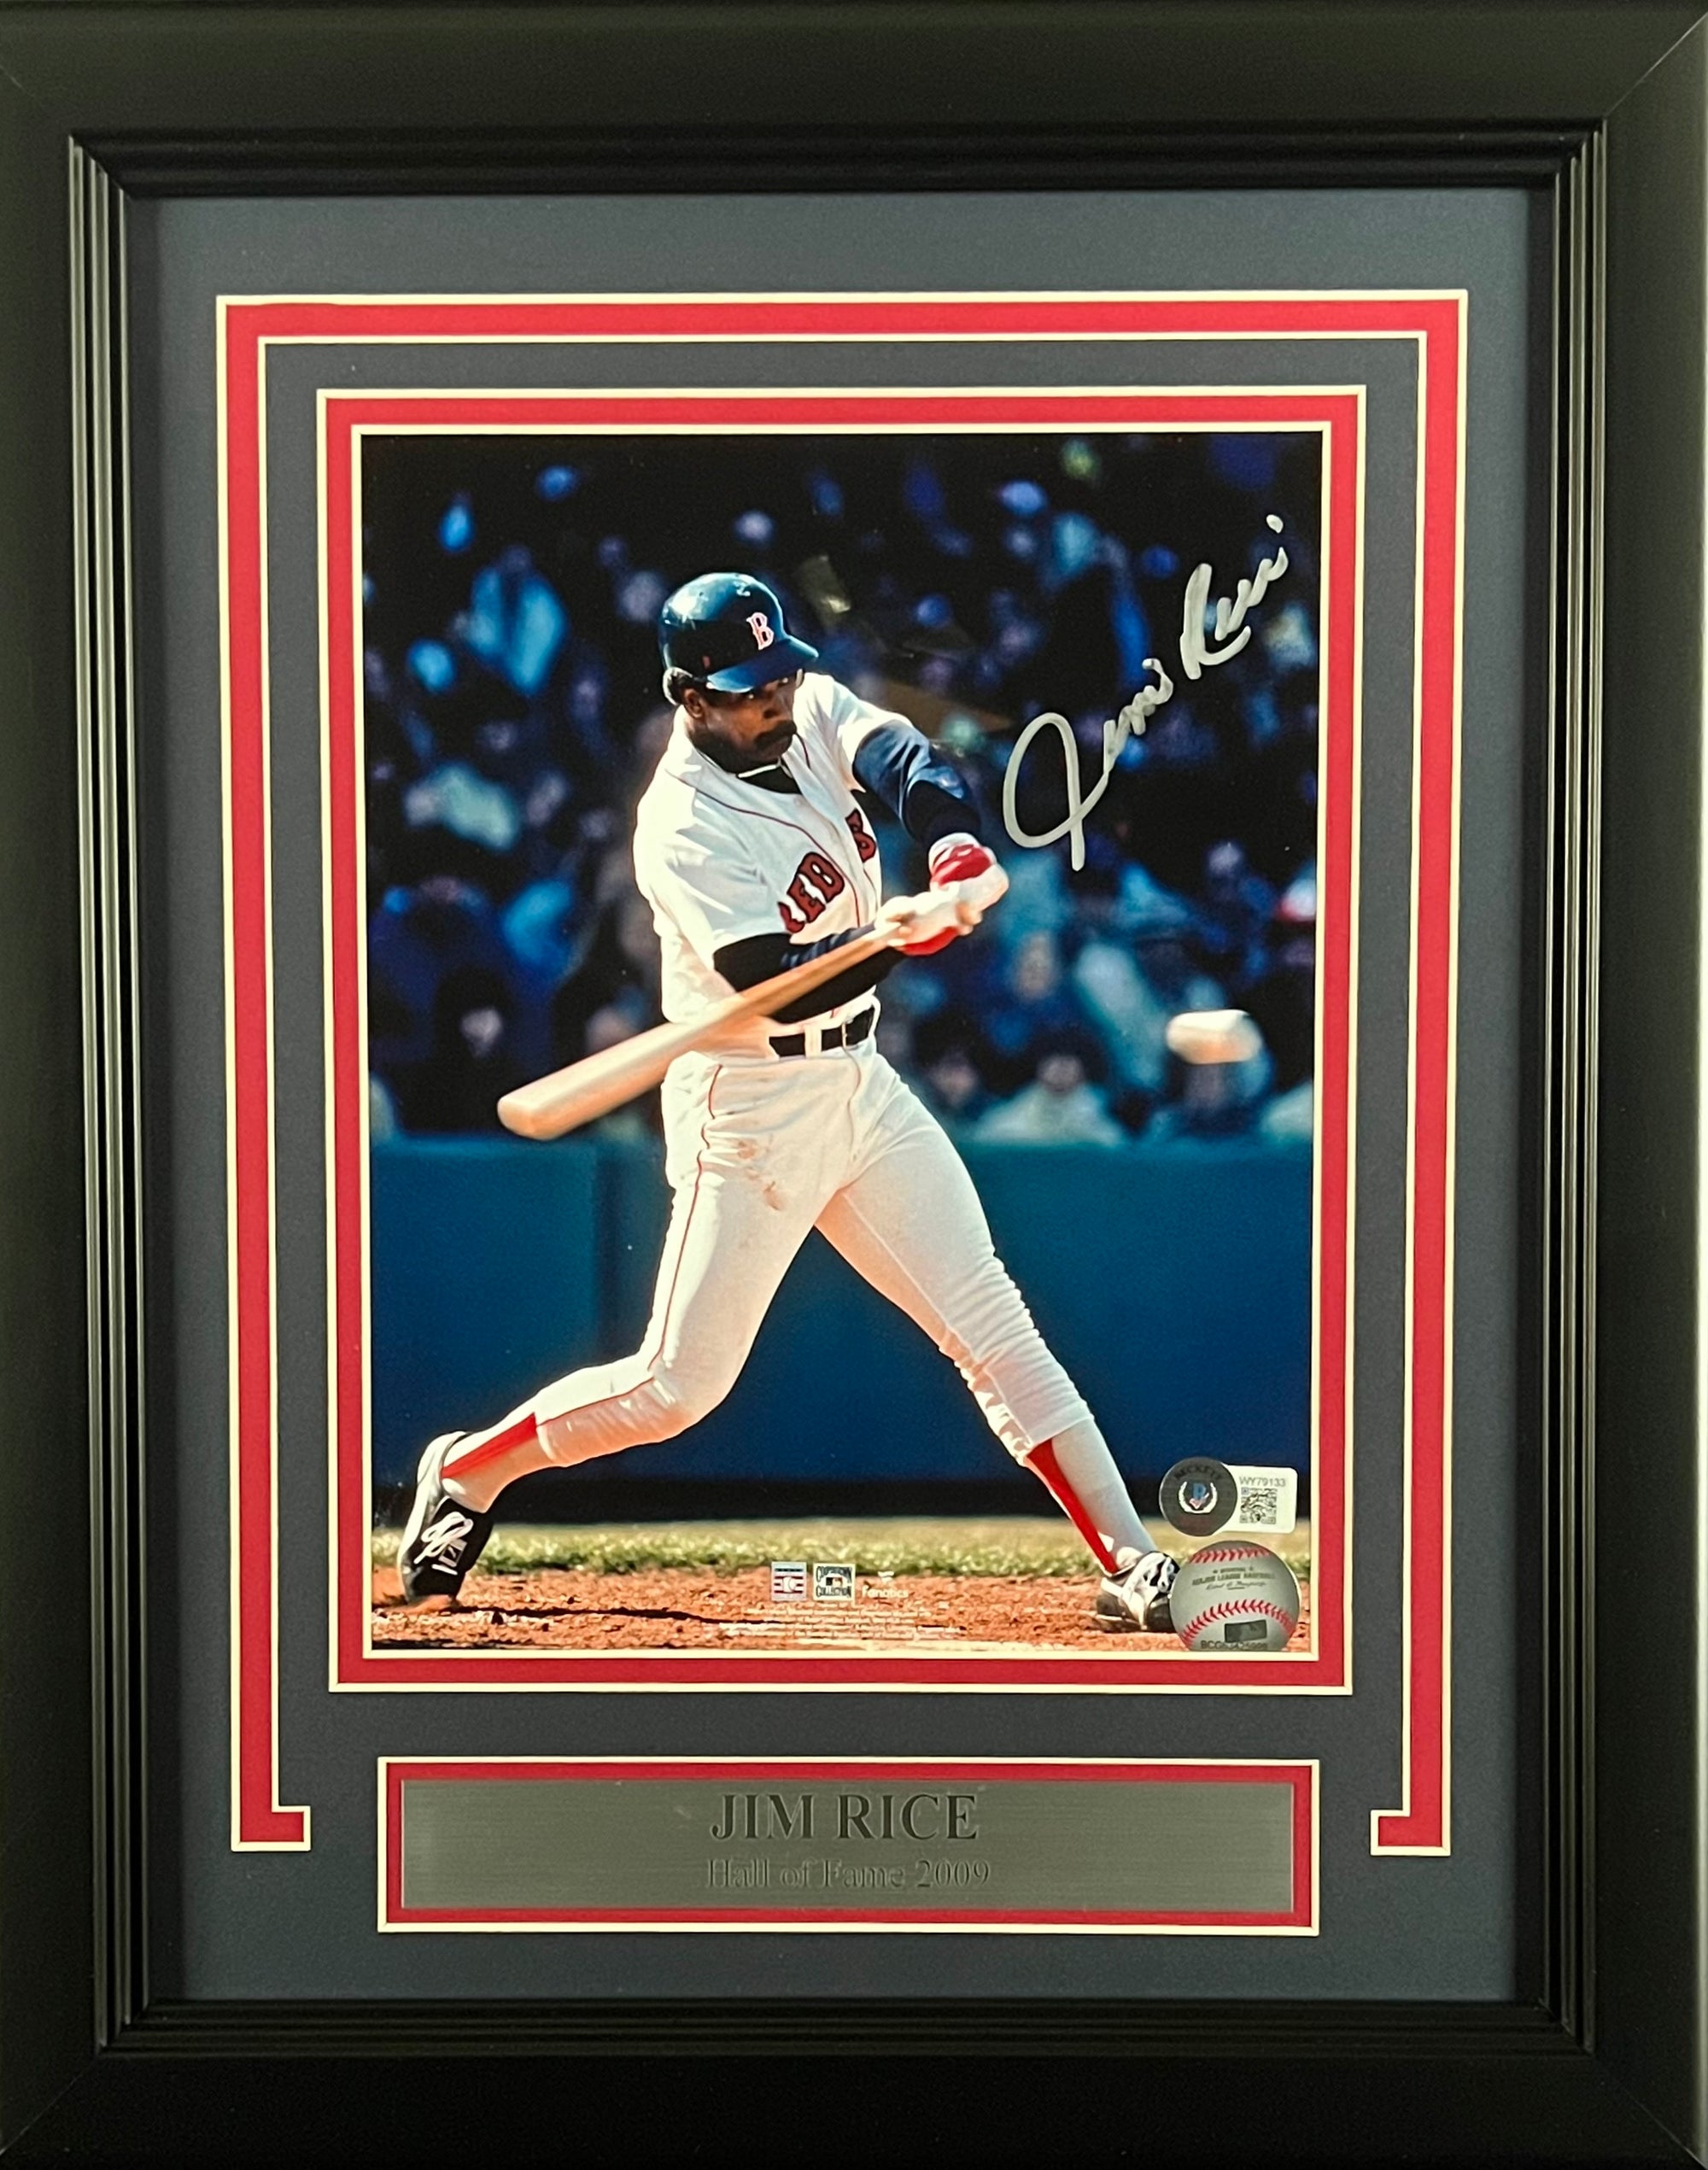 Jim Rice Boston Red Sox Autographed 8x10 Photo Framed